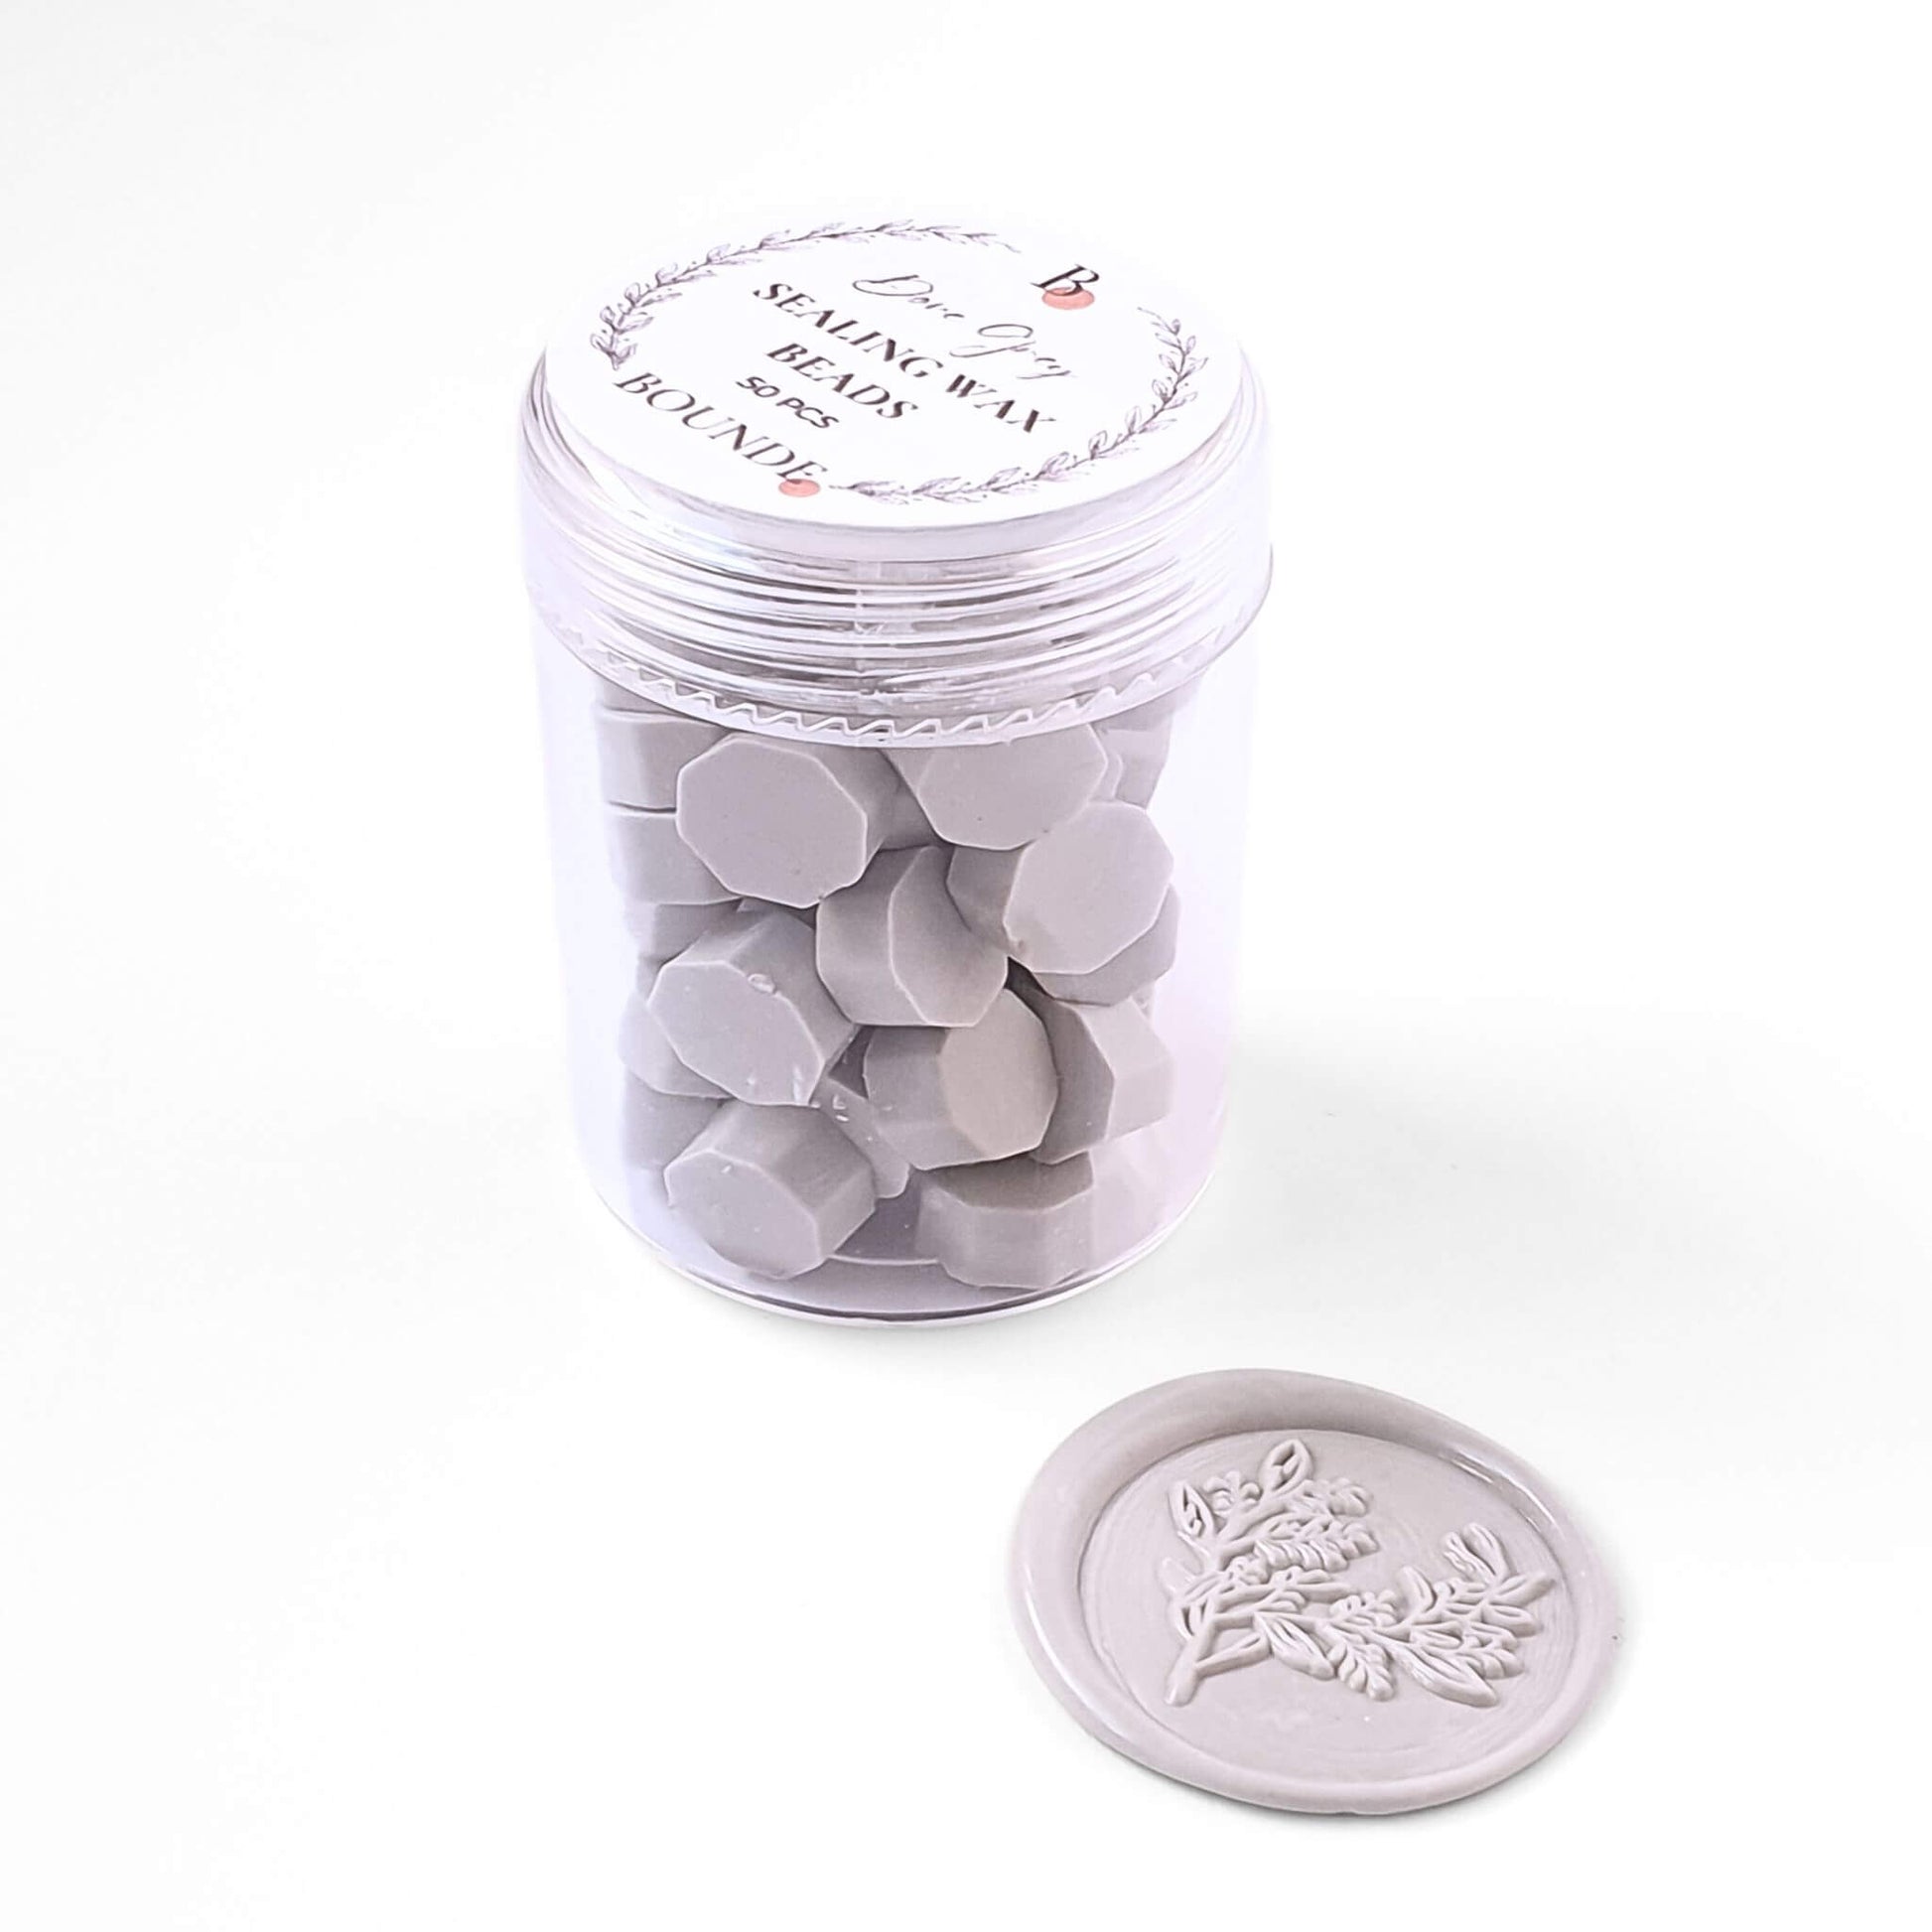 Dove Grey Sealing Wax Beads in jar with light grey wax seal next to it